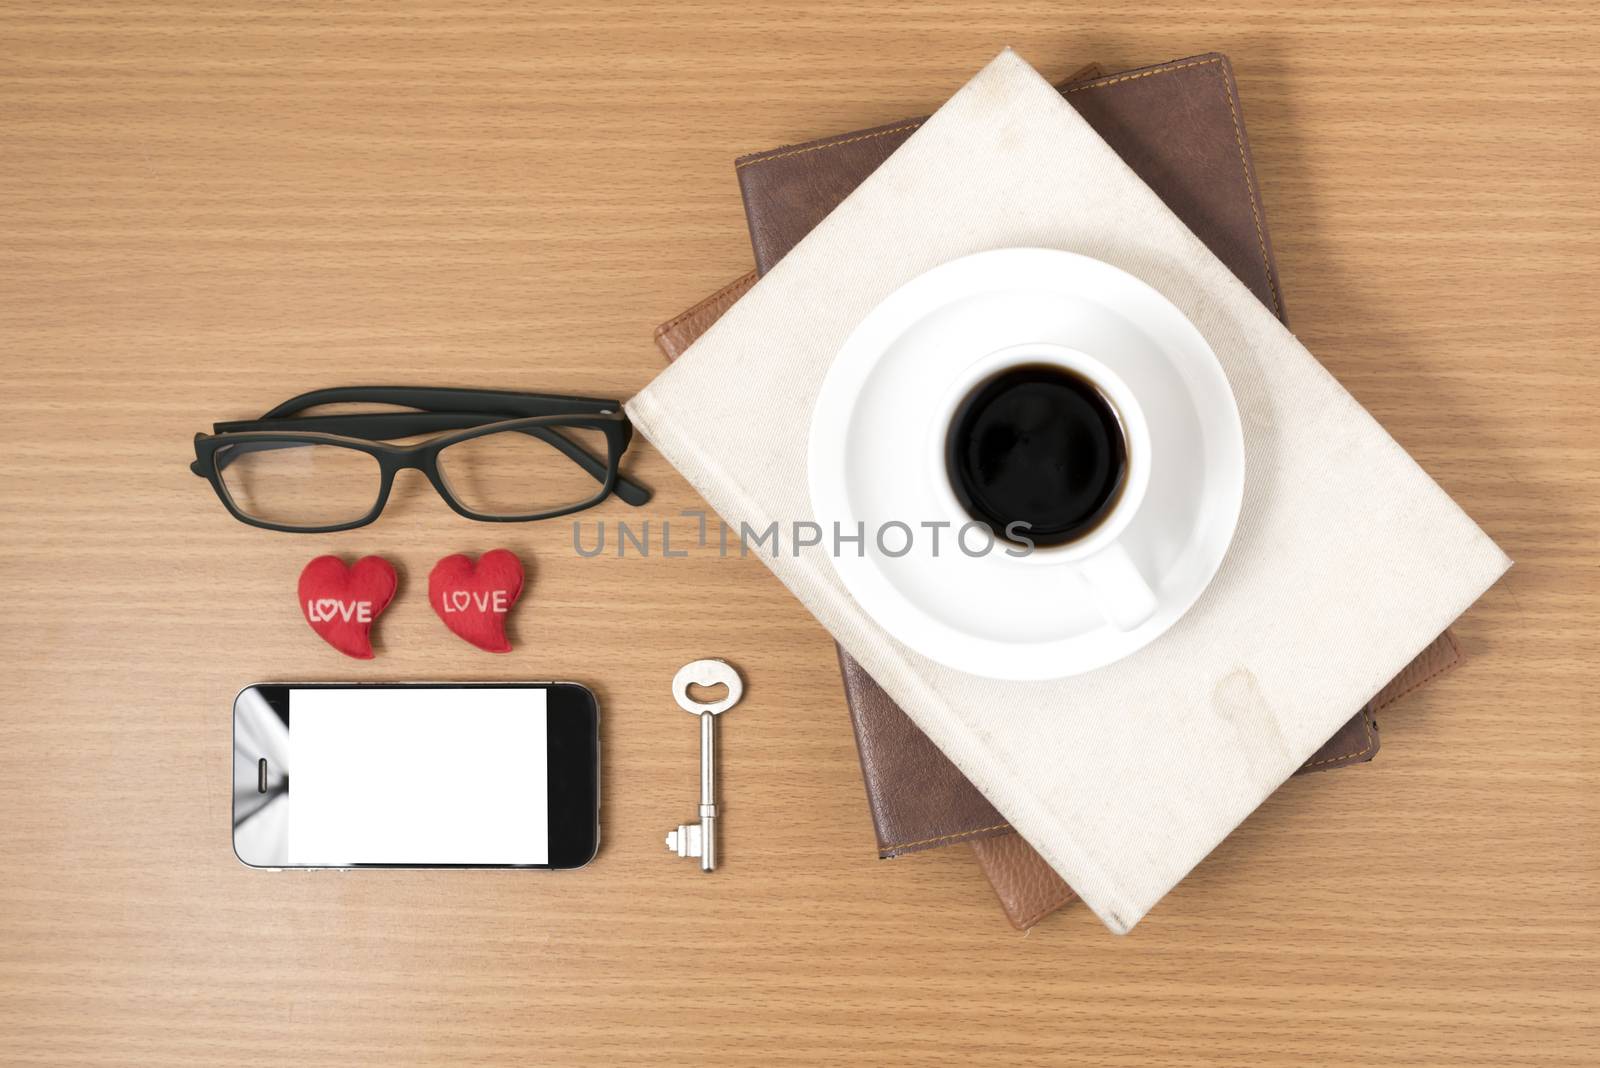 office desk : coffee and phone with key,eyeglasses,stack of book,heart on wood background